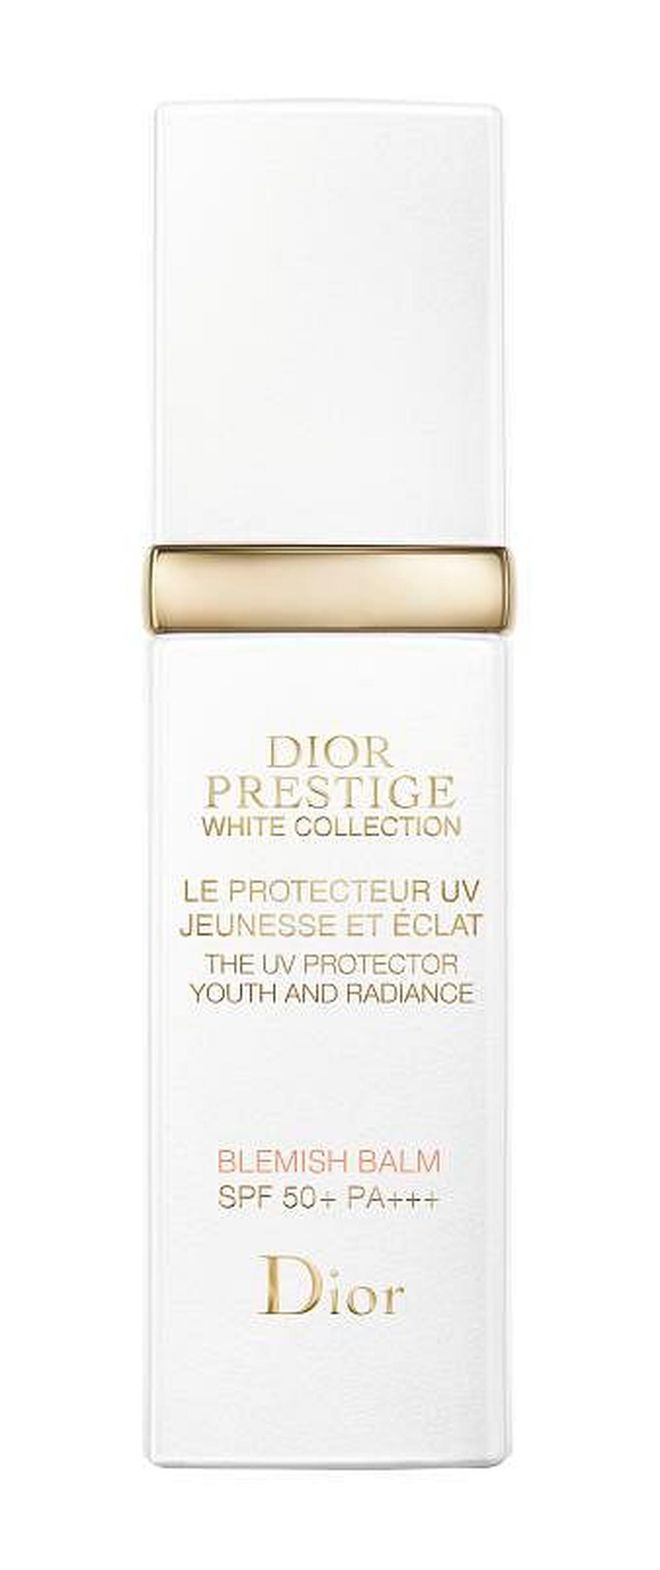 Prestige White The UV Protector Youth and Radiance Blemish Balm SPF 50+ PA+++, $165, Dior